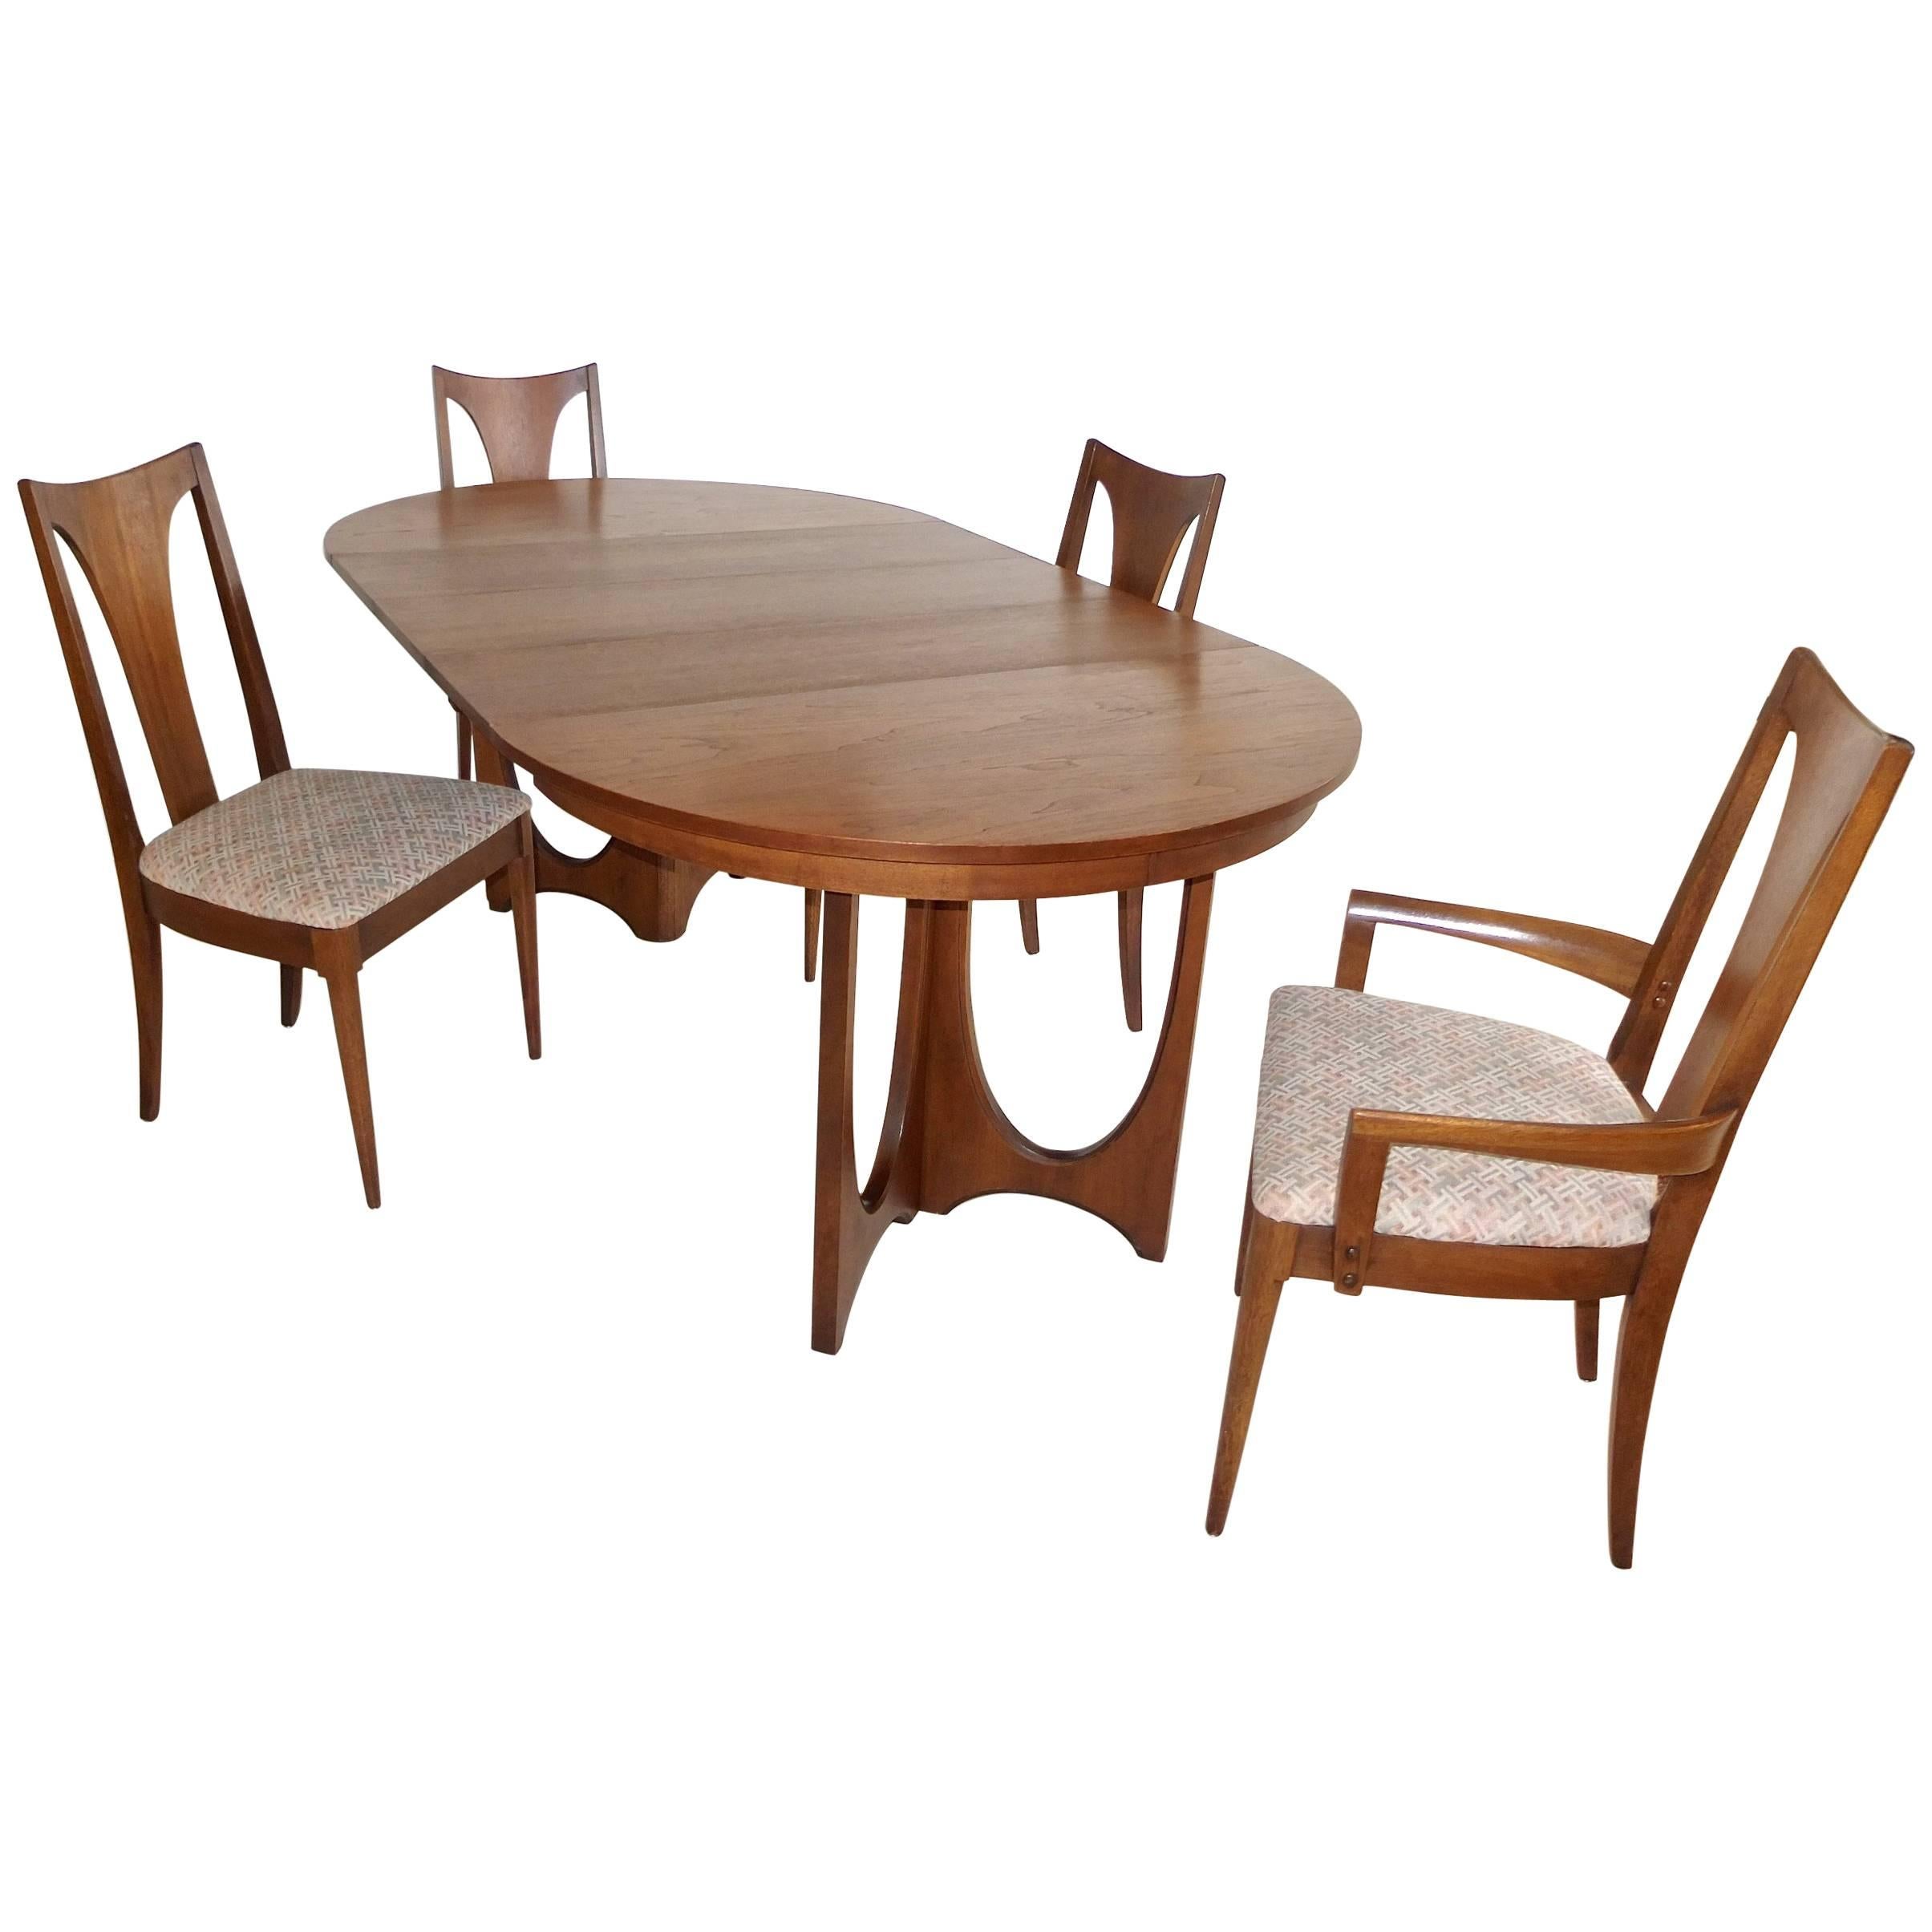 Broyhill Brasilia Walnut Dining Table and Chairs